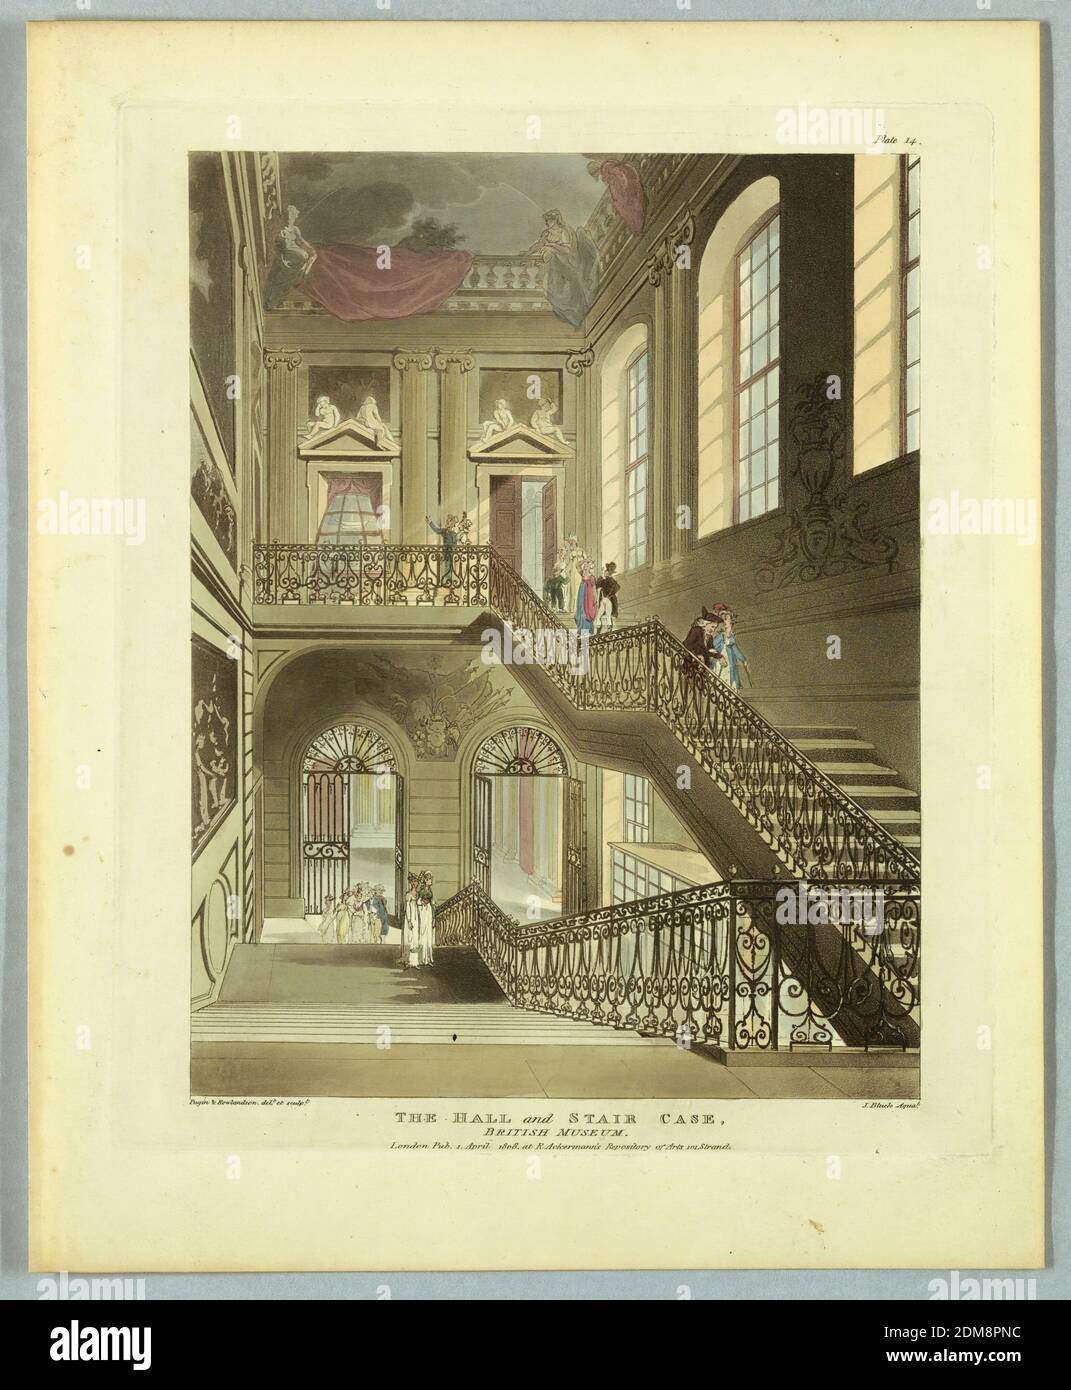 The Hall and Staircase, British Museum, from 'Ackermann's Repository', Thomas Rowlandson, British, 1756–1827, Augustus Charles Pugin, French, active Great Britain, ca. 1762–1832, John Bluck, British, 1791–1832, Aquatint, brush and watercolors on paper, Wide staircase with wrought iron railings, descending to the left, up to the right. Doorways and windows open in the rear and to the right. Title, artists', and publisher's names below., Europe, London, England, 1808, Print Stock Photo